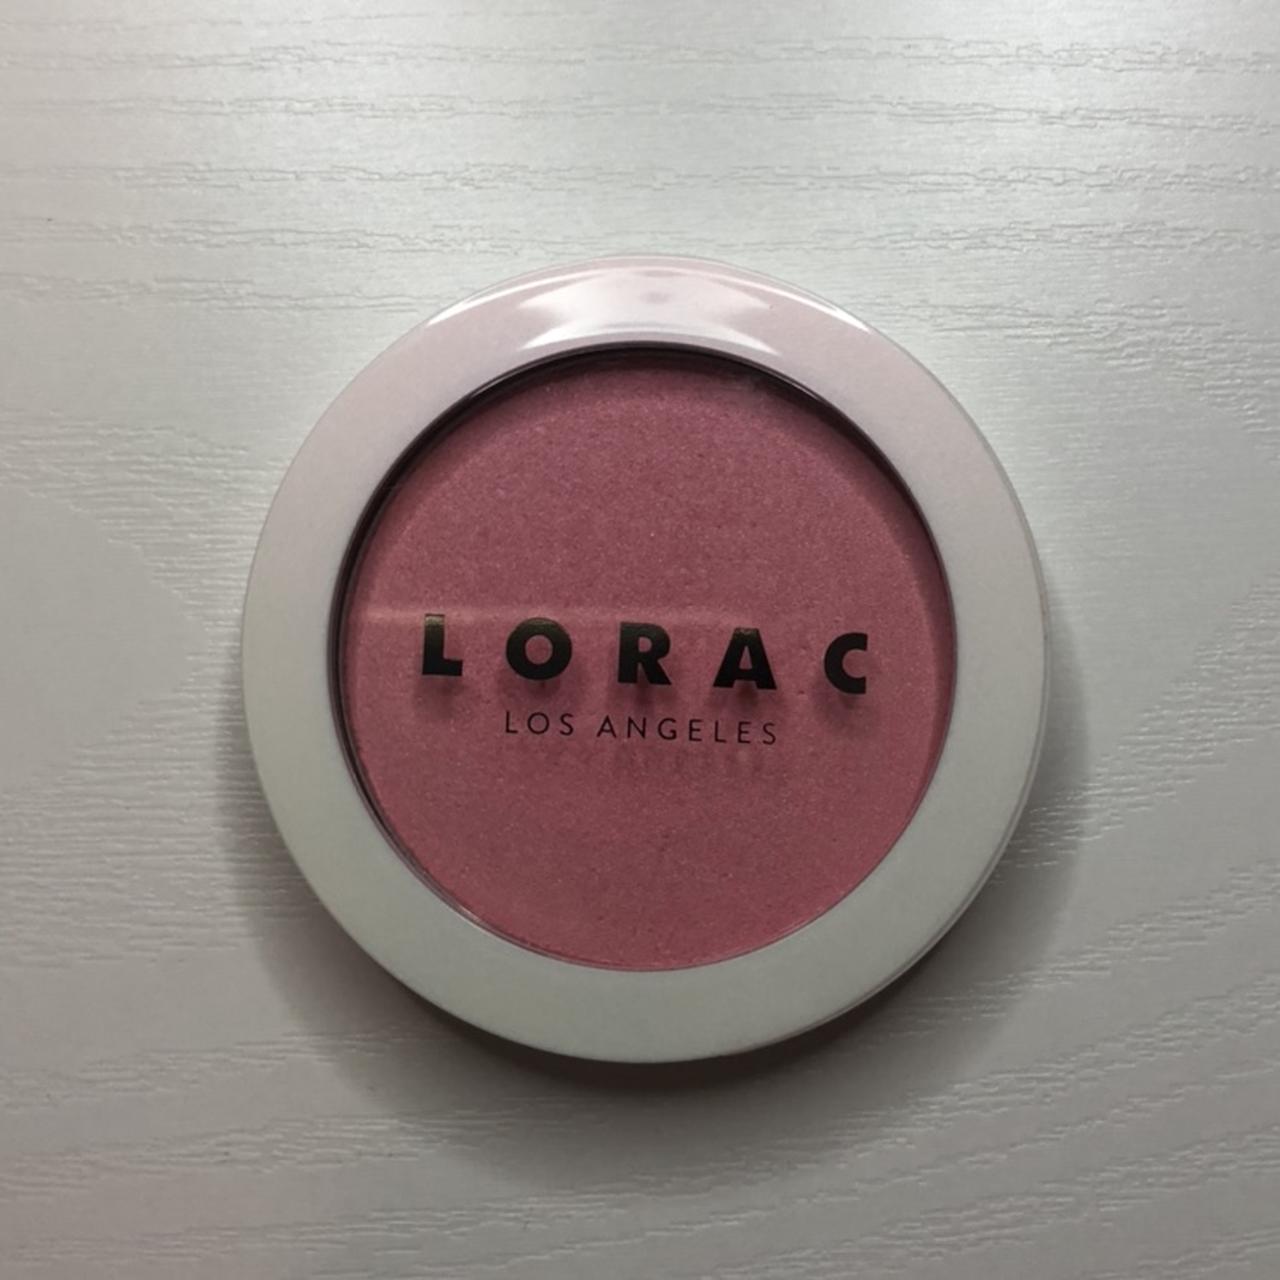 LORAC Pink and White Makeup